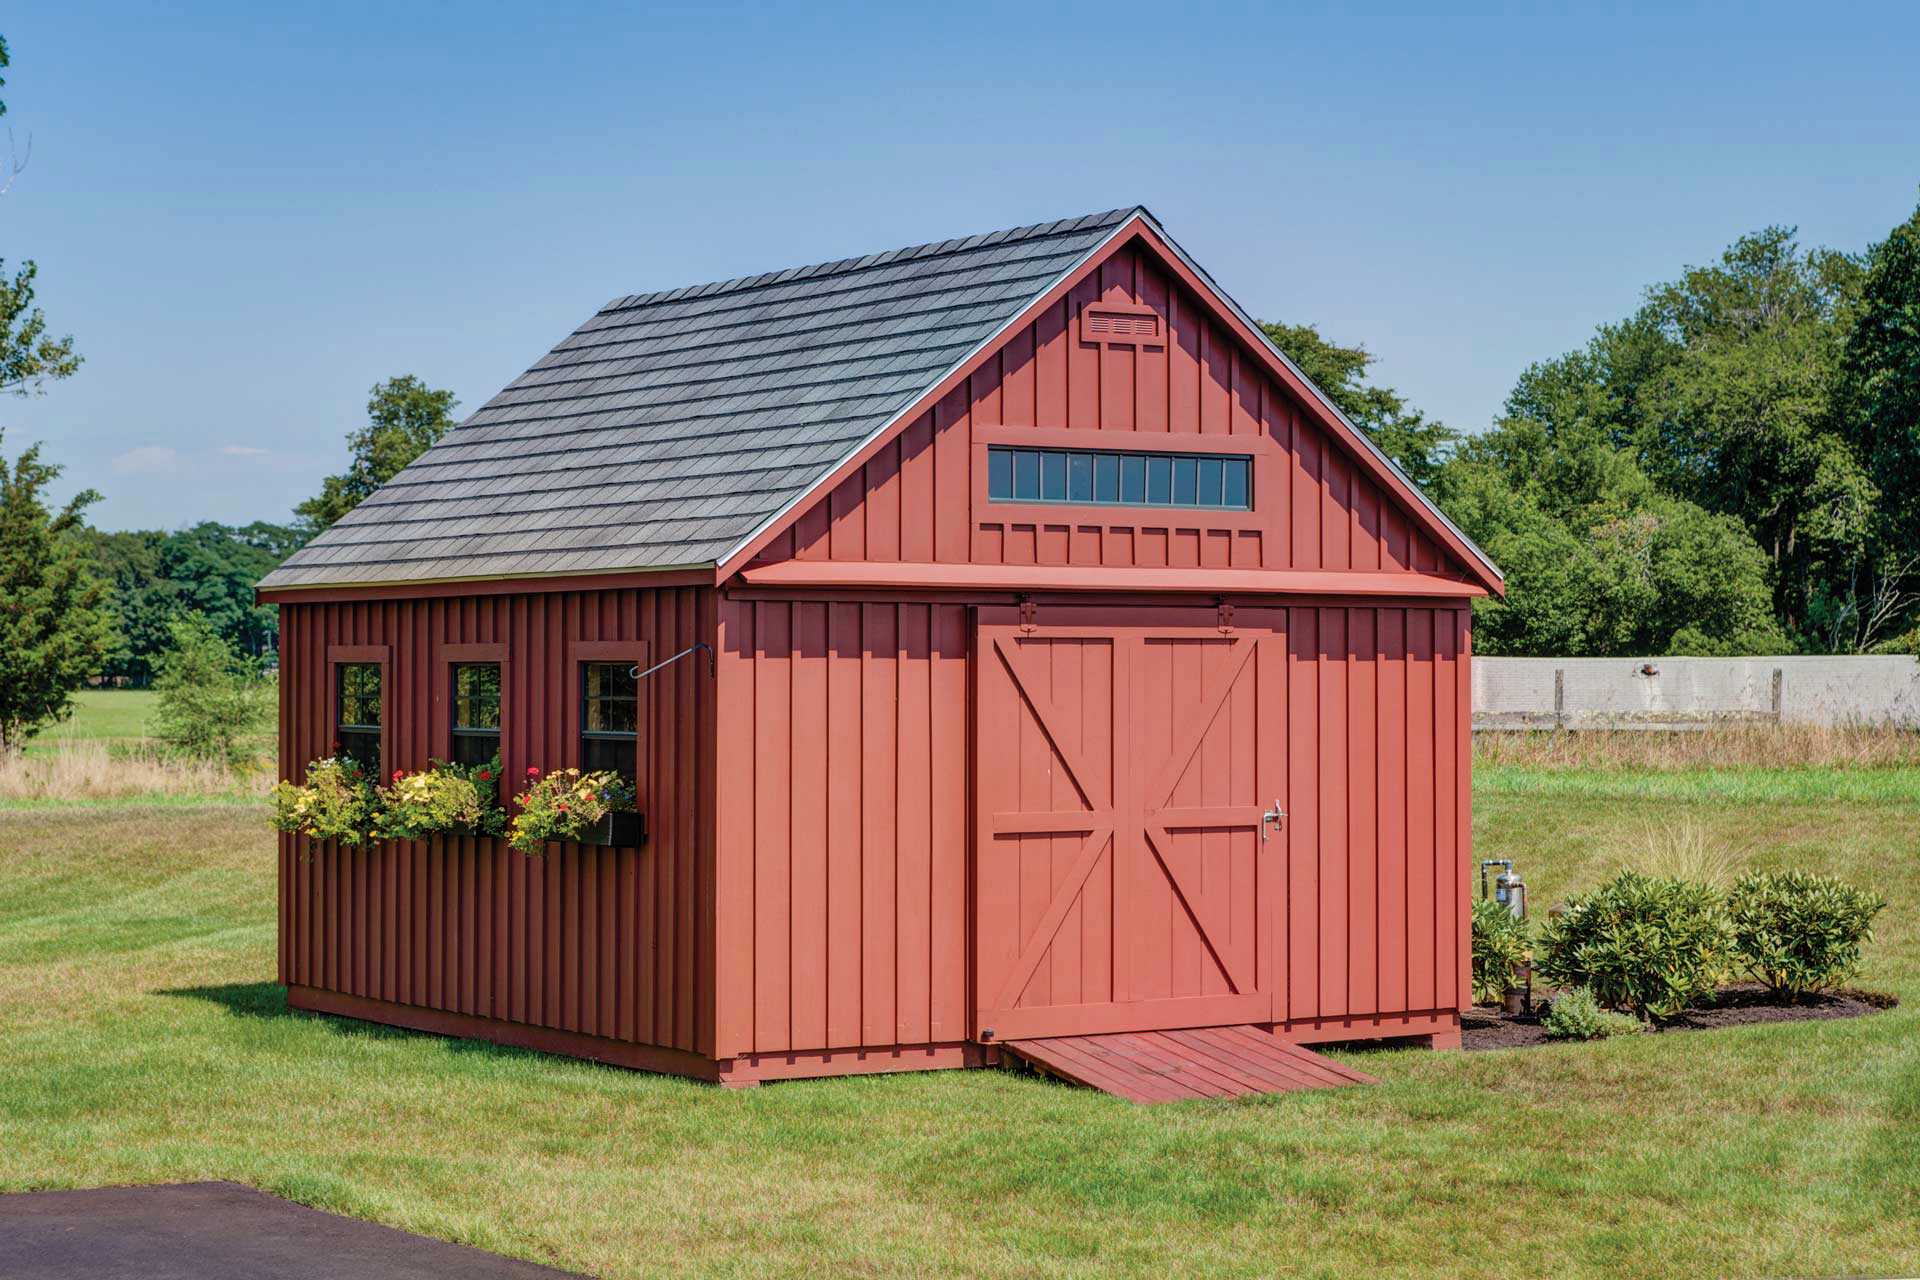 Shed Styles: Choosing the Right One for You